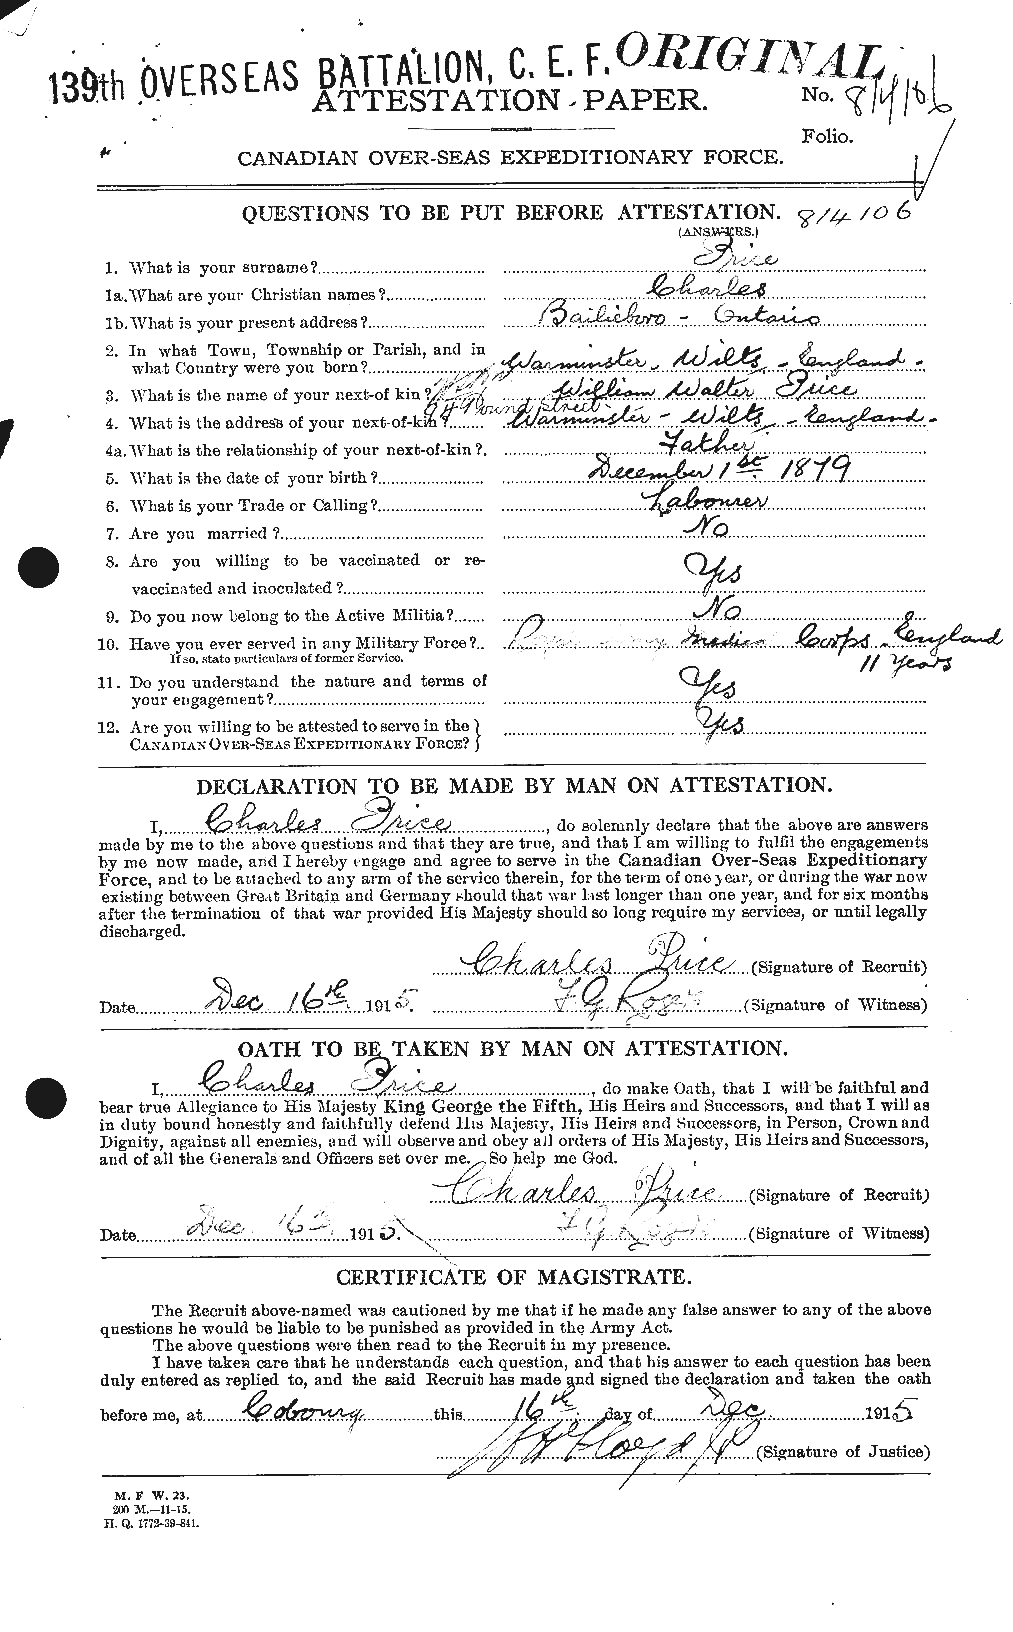 Personnel Records of the First World War - CEF 586962a